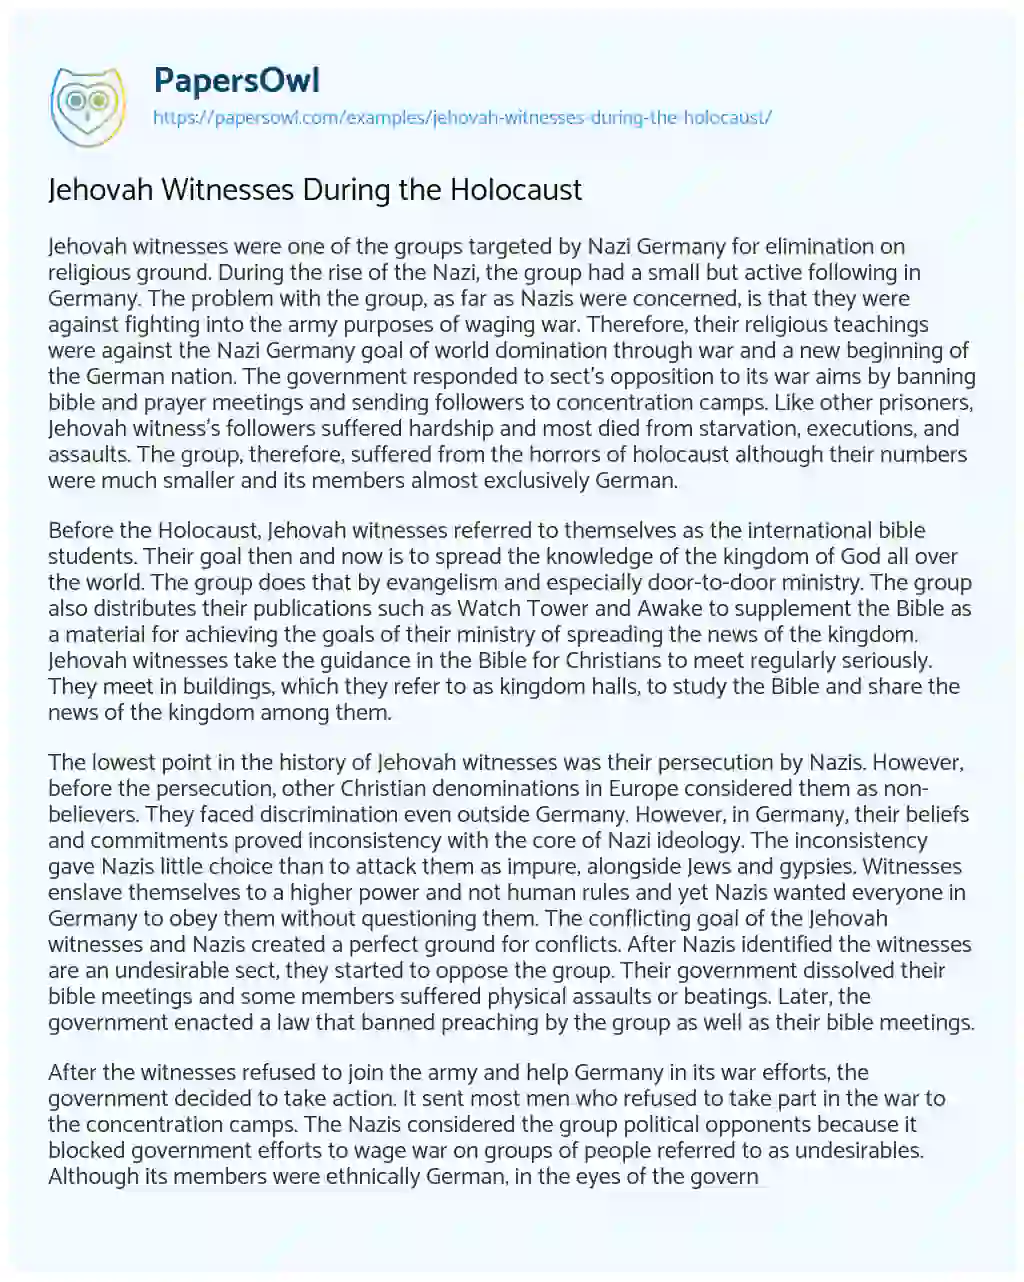 Essay on Jehovah Witnesses during the Holocaust